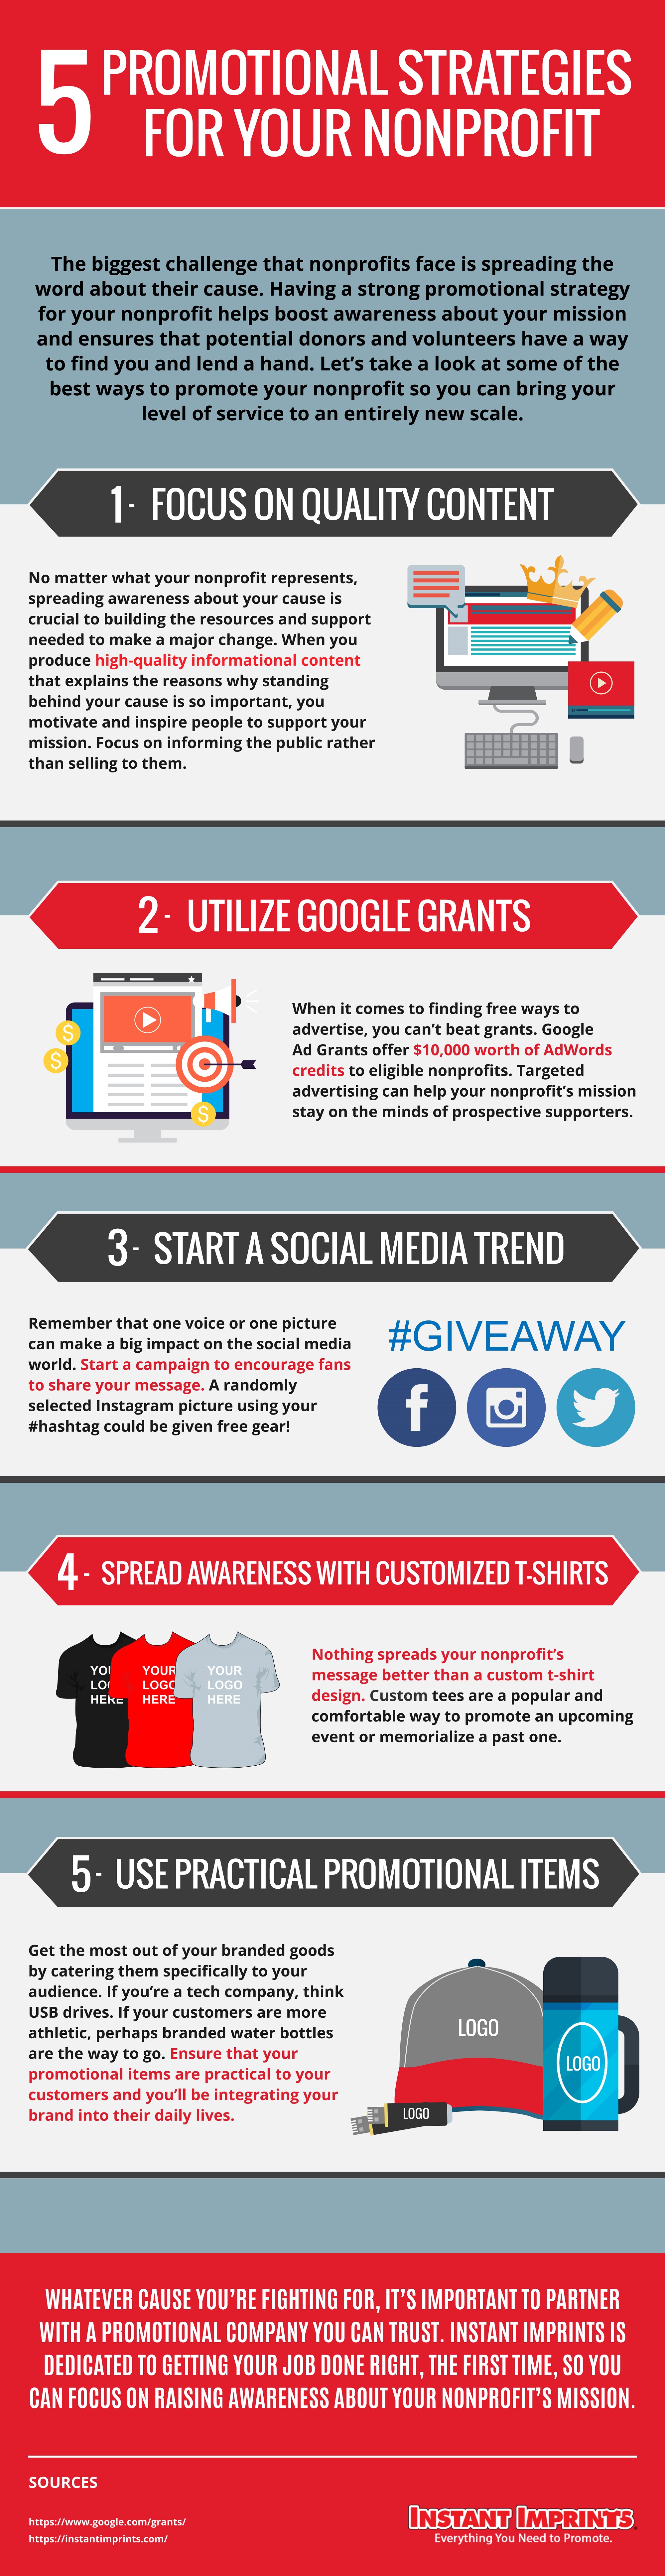 Promotional Strategies for Nonprofits Infographic